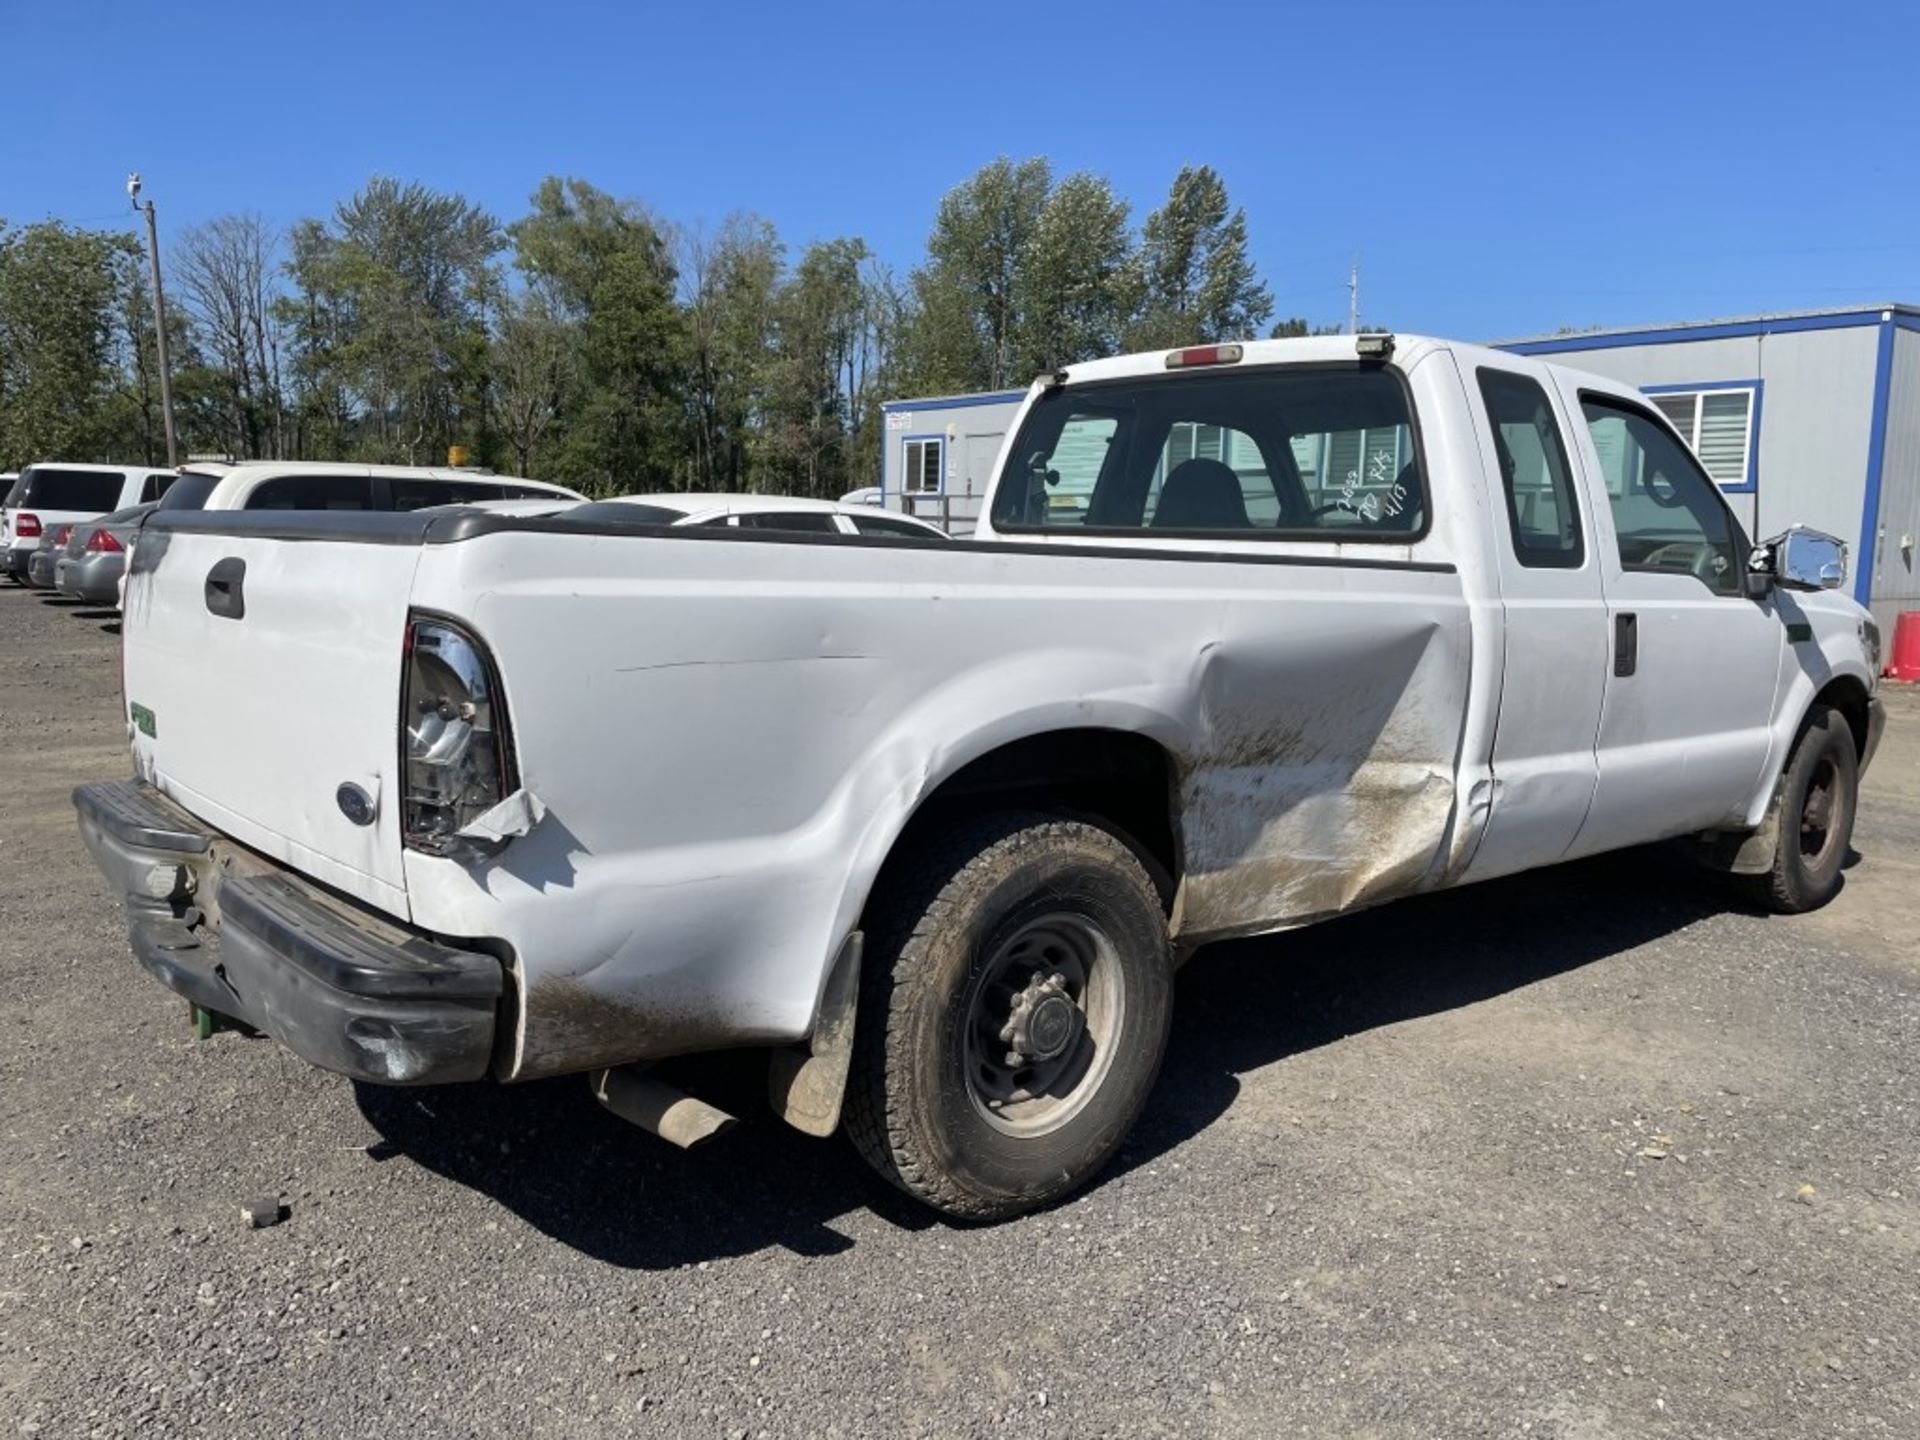 1999 Ford F250 SD Extra Cab Pickup - Image 3 of 24